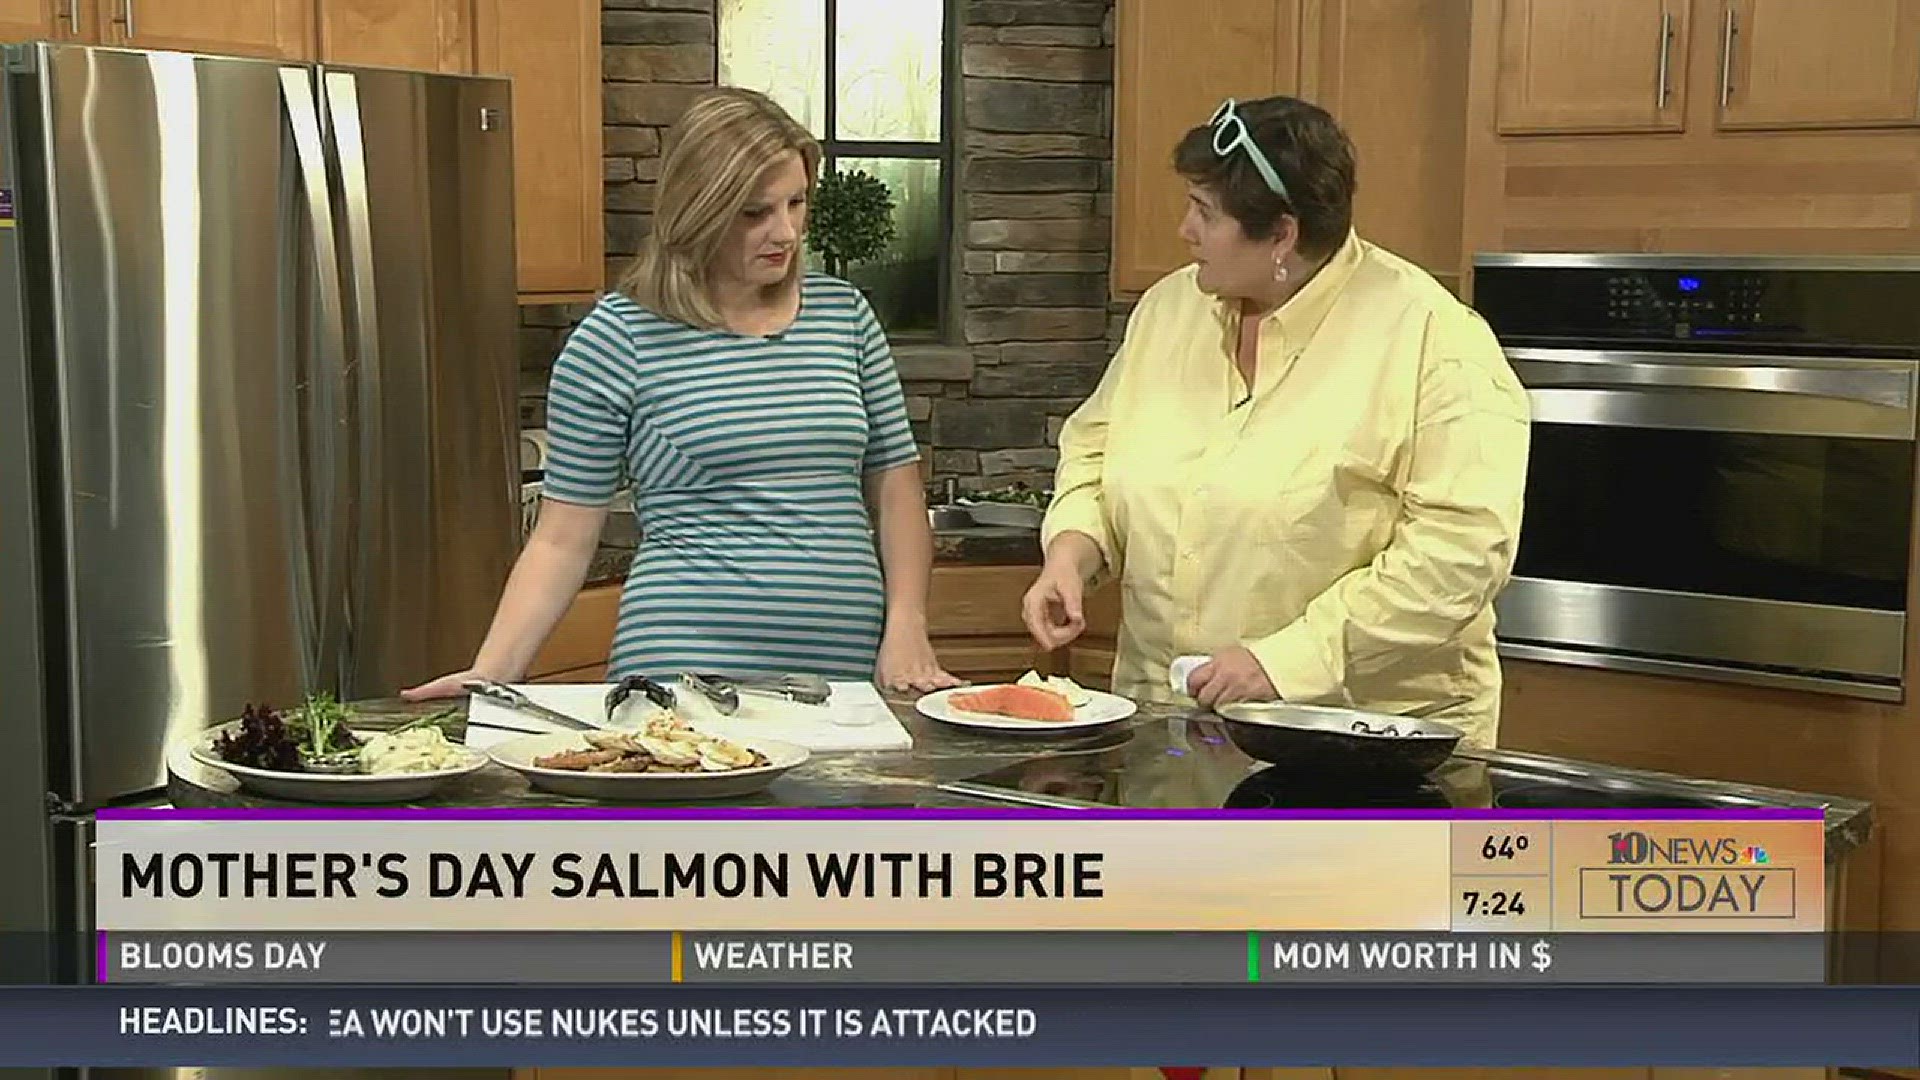 Lisa Smith shares her recipes for Mother's Day salmon and brie.